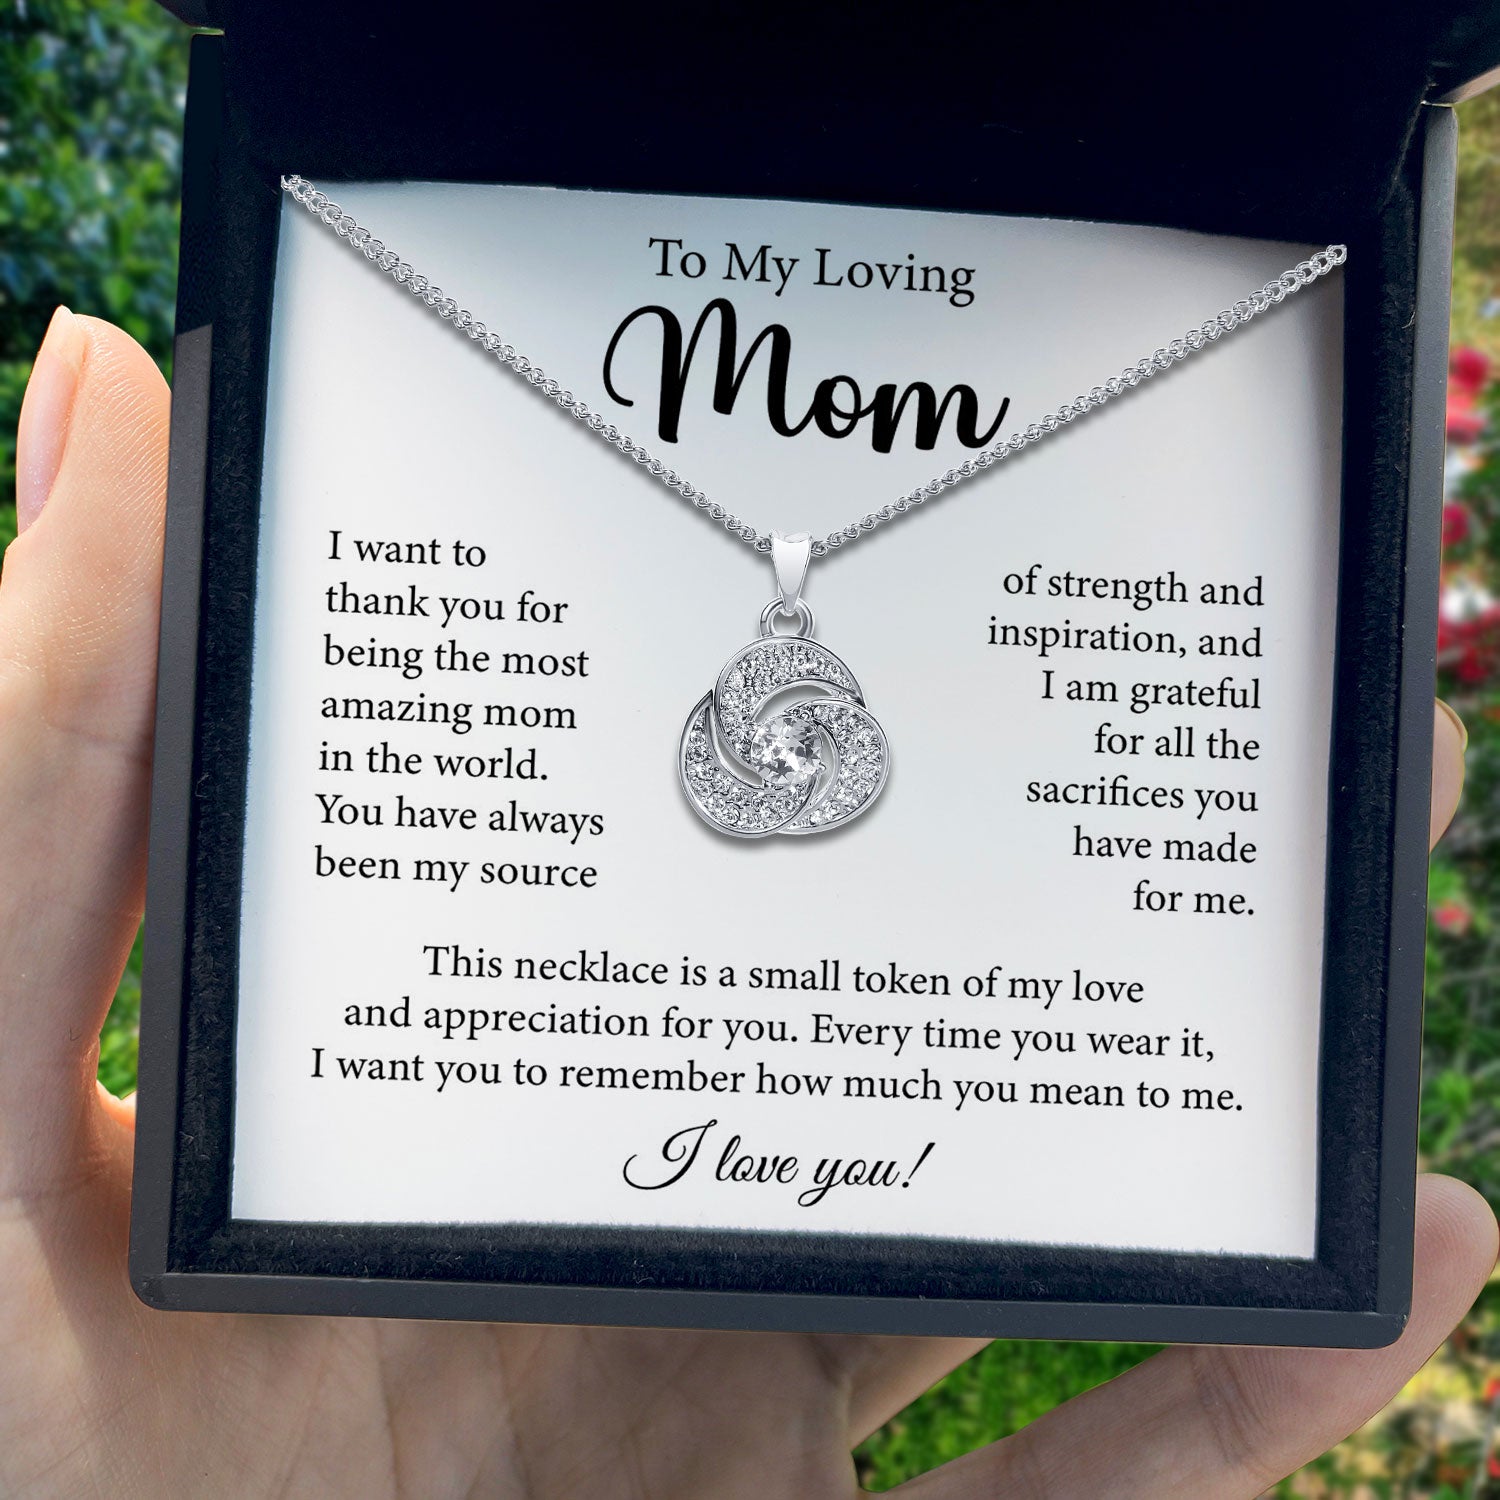 To My Loving Mom - You Have Always Been My Source Of Strength & Inspiration - Tryndi Love Knot Necklace